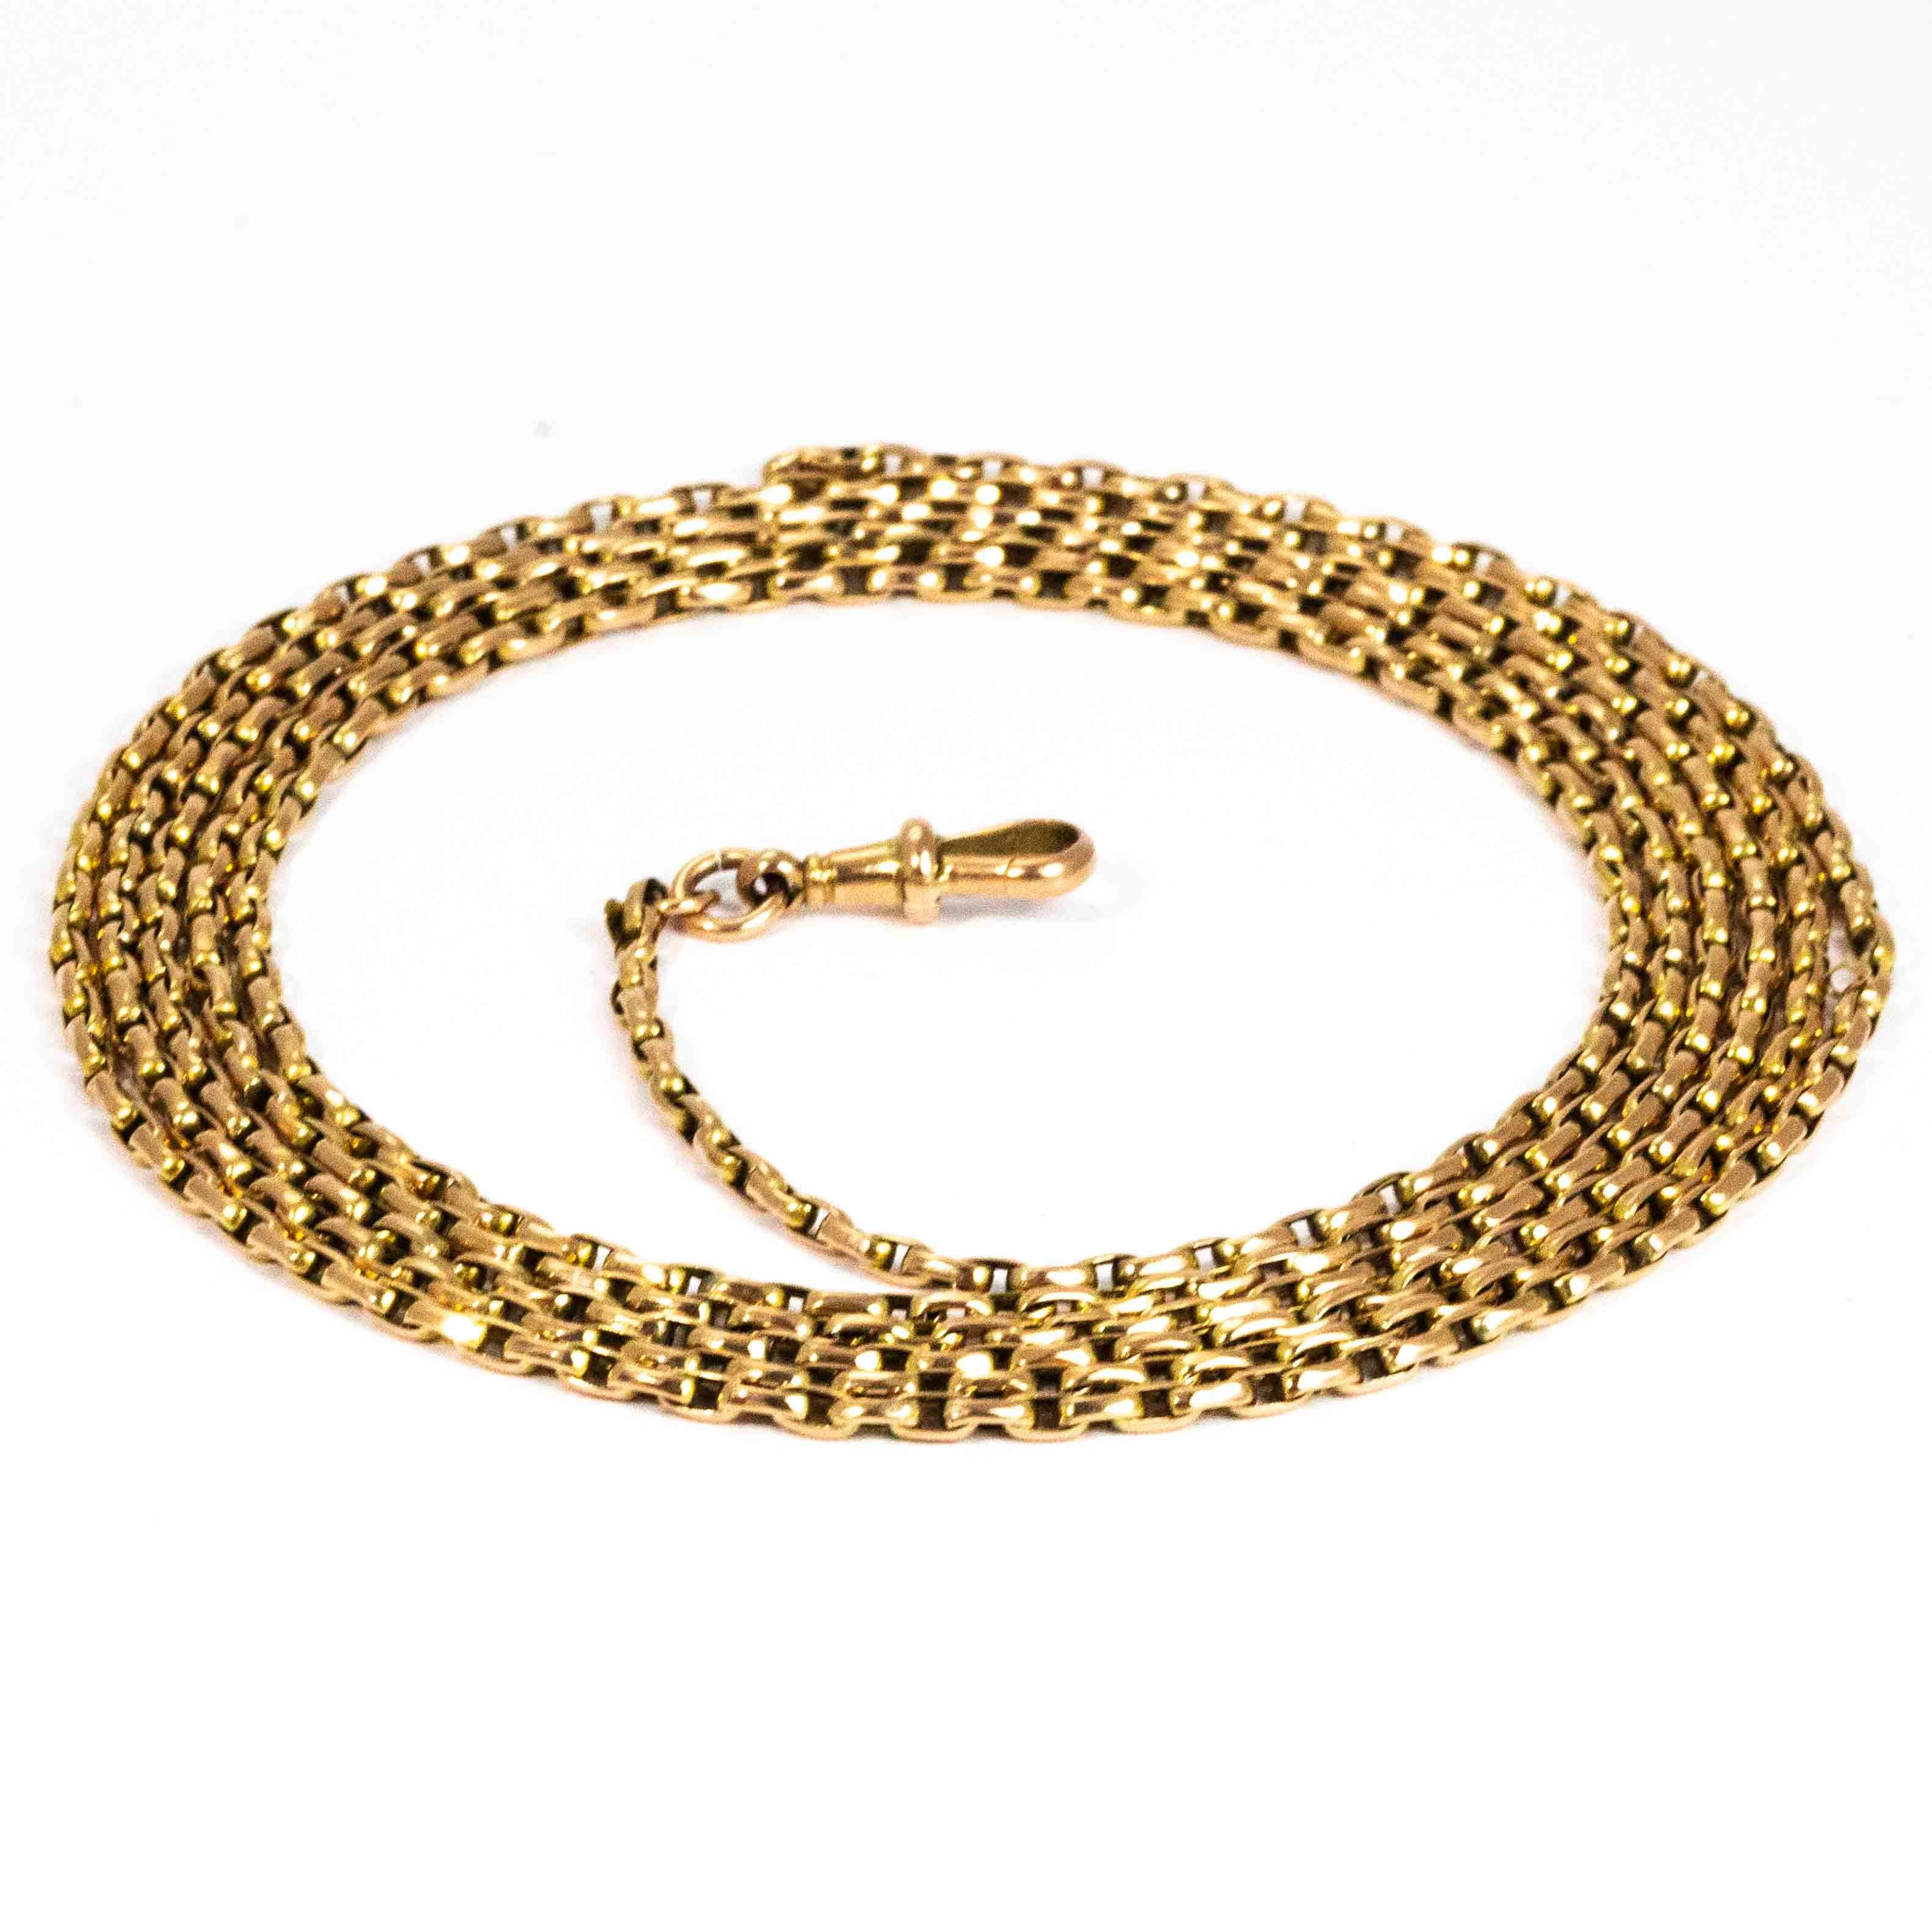 A beautiful vintage longuard chain necklace. The chain is formed of superb long slender links and finished in a fine dog-clip. Modelled in 9 carat yellow gold.

Length: 143cm